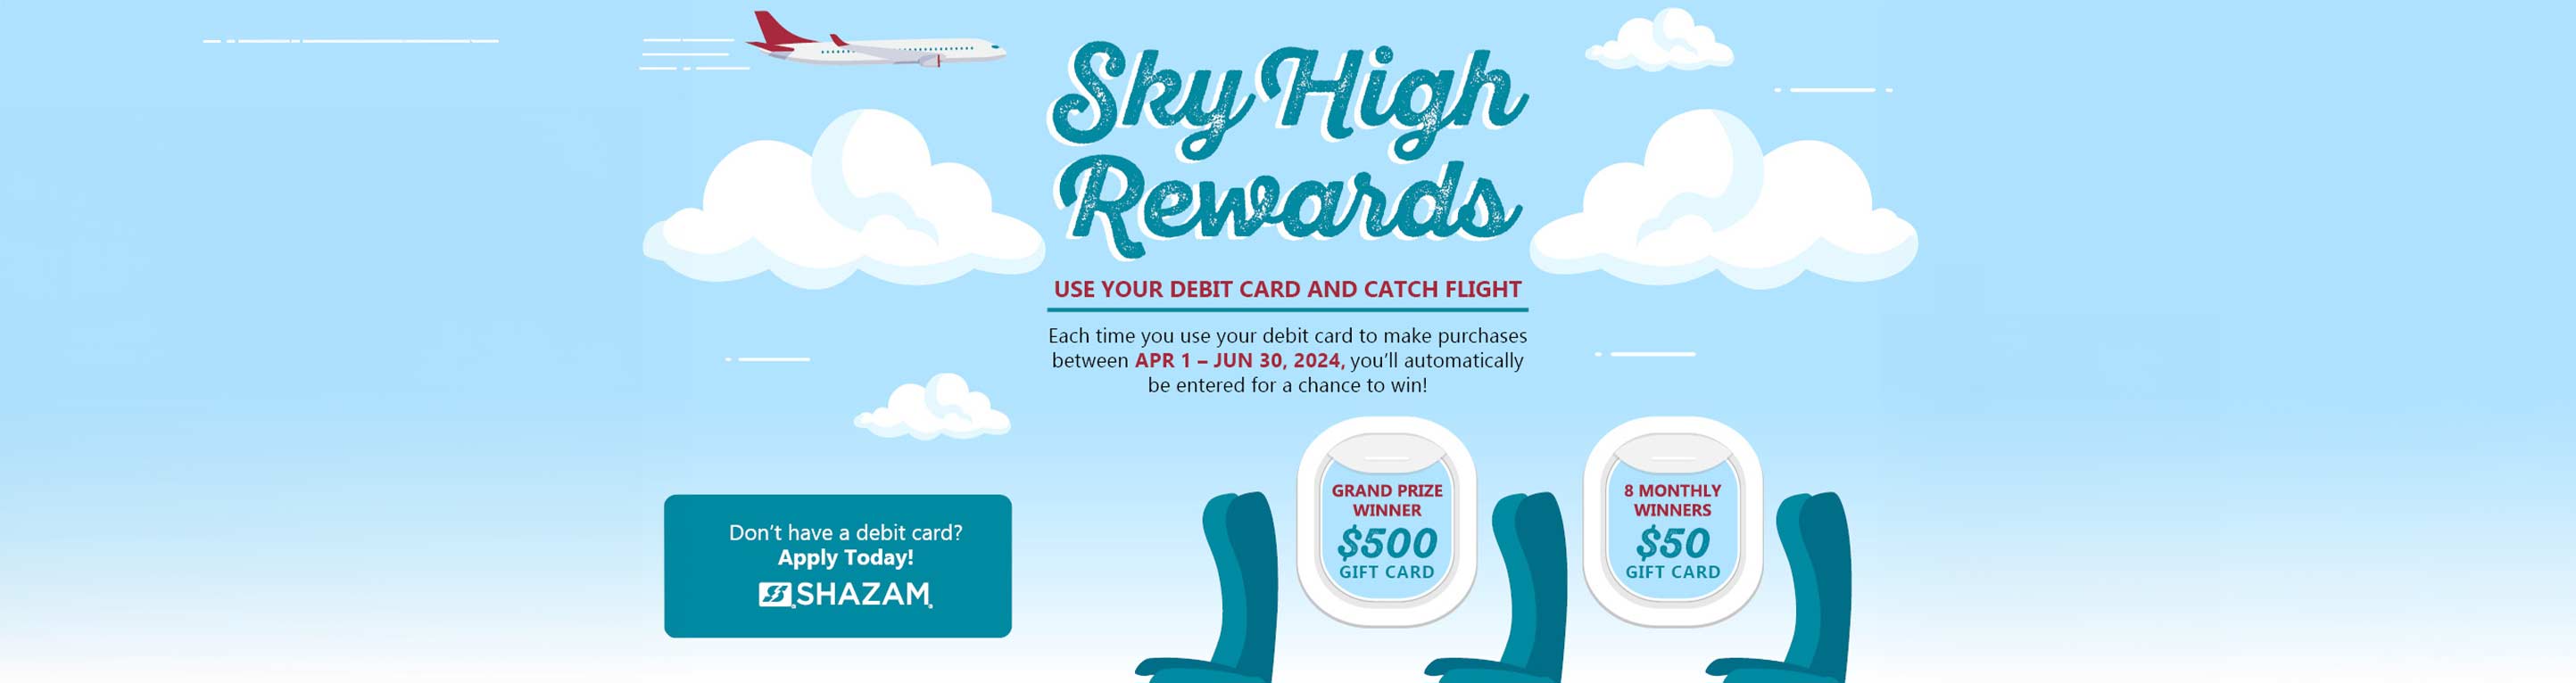 Sky High Rewards, use your debit card and catch flight. Each time you use your debit card to make purchases between April 1 and June 30, 2024, you'll automatically be entered for a chance to win!